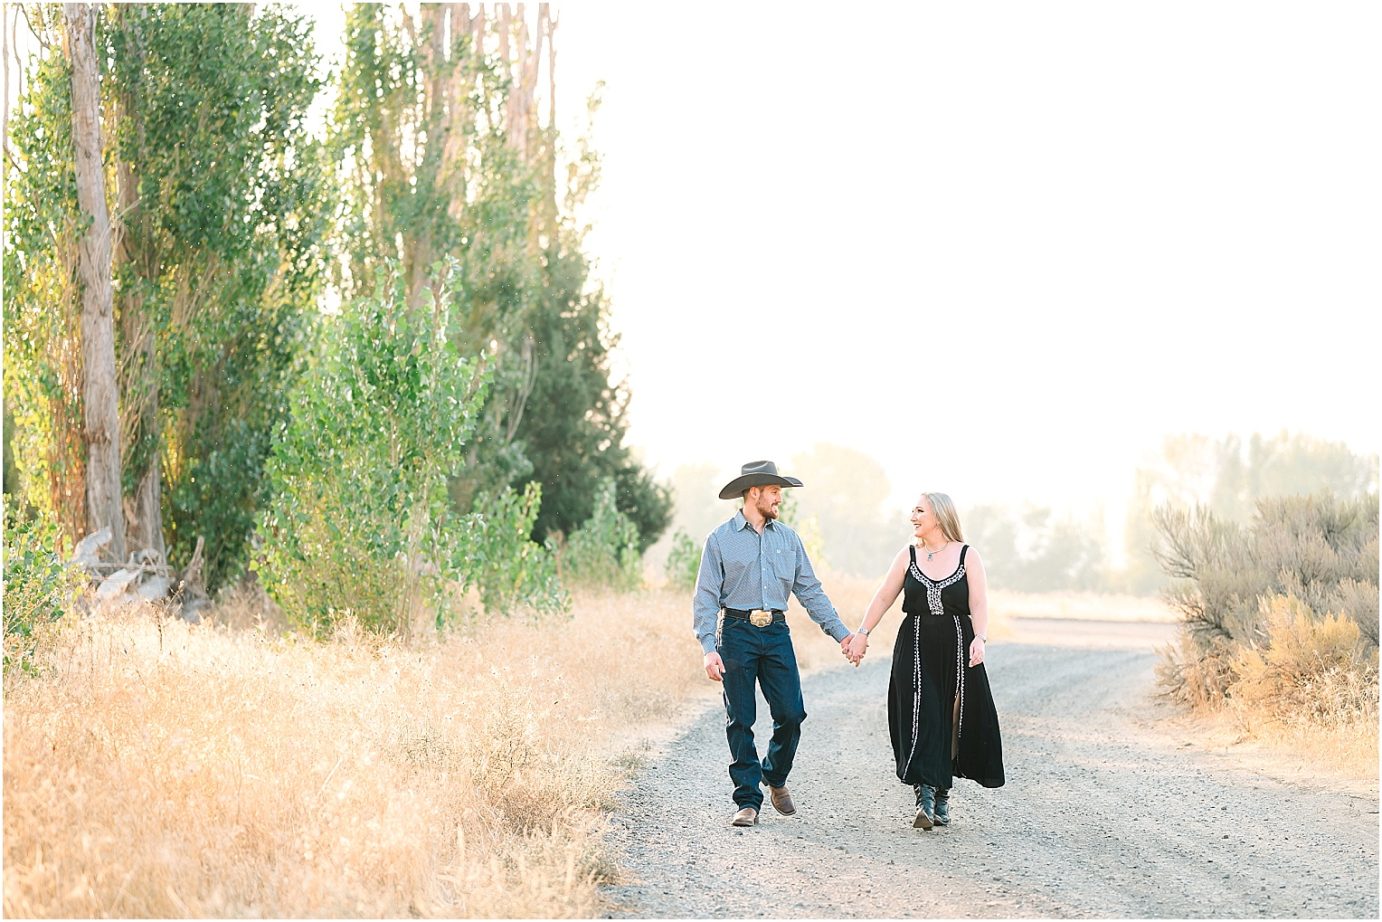 Engagement session in the desert Central WA Andrew and Shelby couple wearing western attire